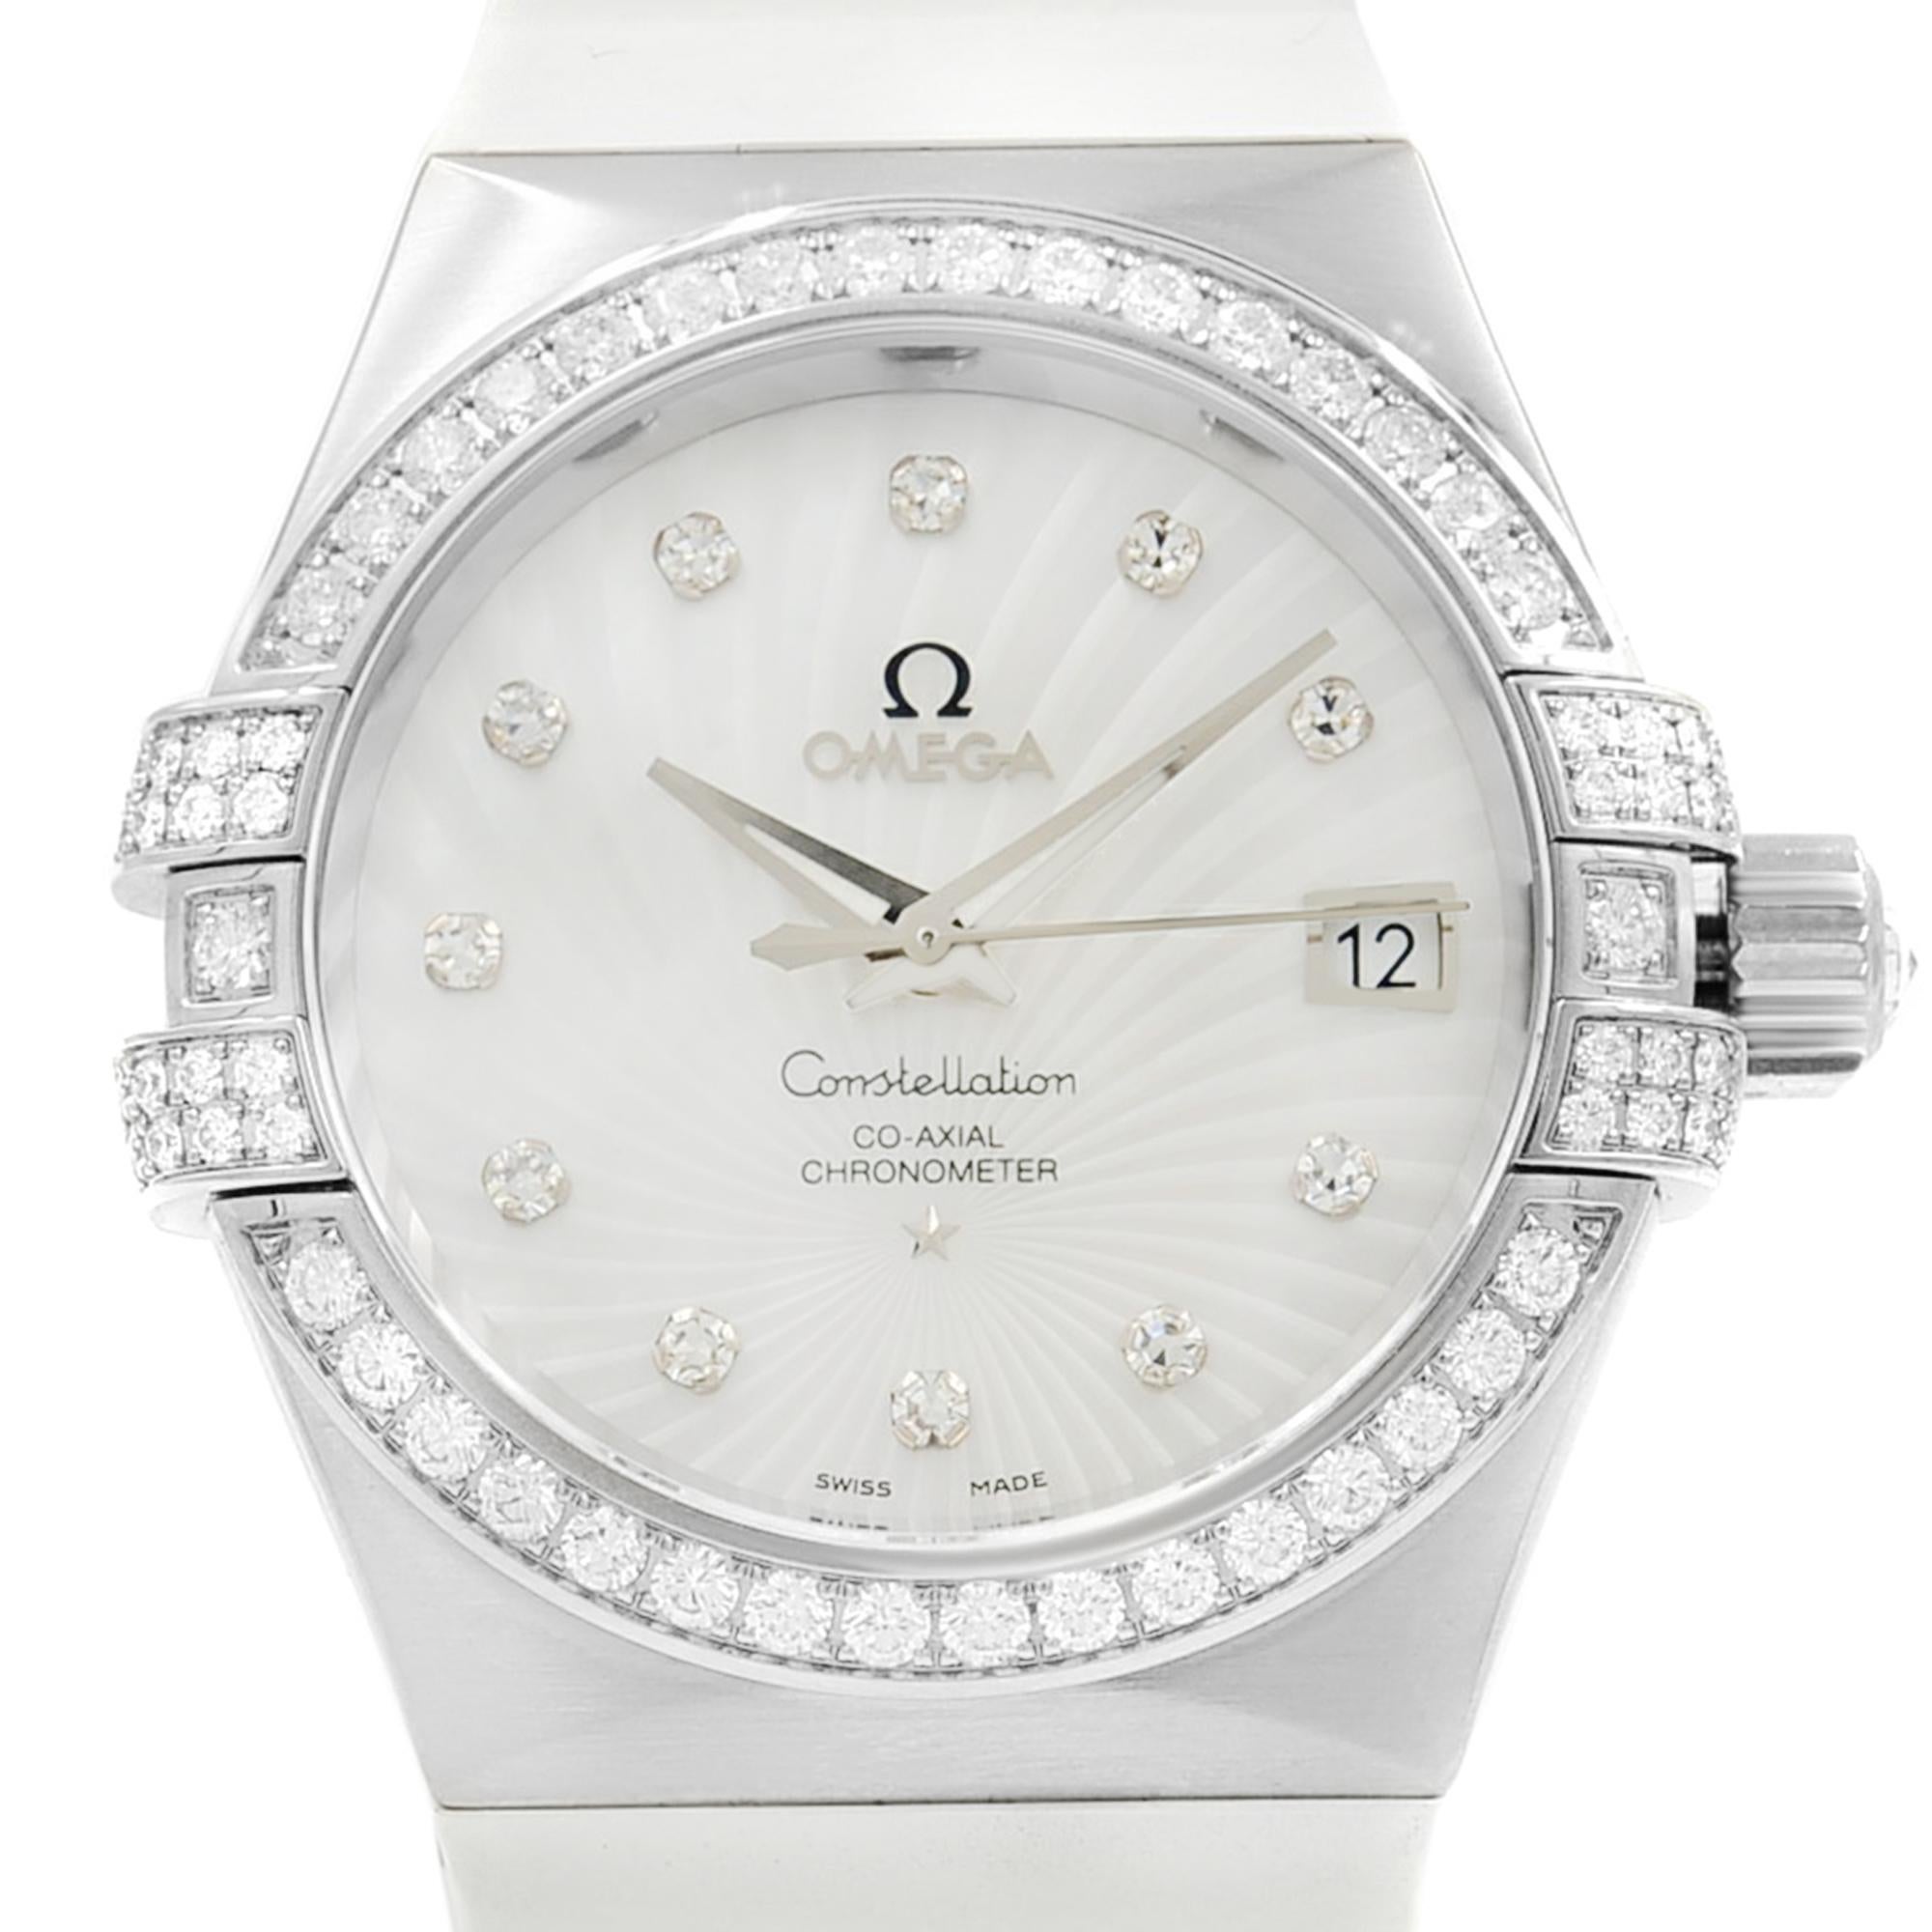 Unworn Omega Constellation 18k White Gold MOP Dial Diamond Watch. This Beautiful Timepiece Features: 18k White Gold Case, A White Mother-of-Pearl Dial Decorated with A Supernova Pattern, Diamond-Set Indexes on Bezel, Claws, and Dial. Comes With